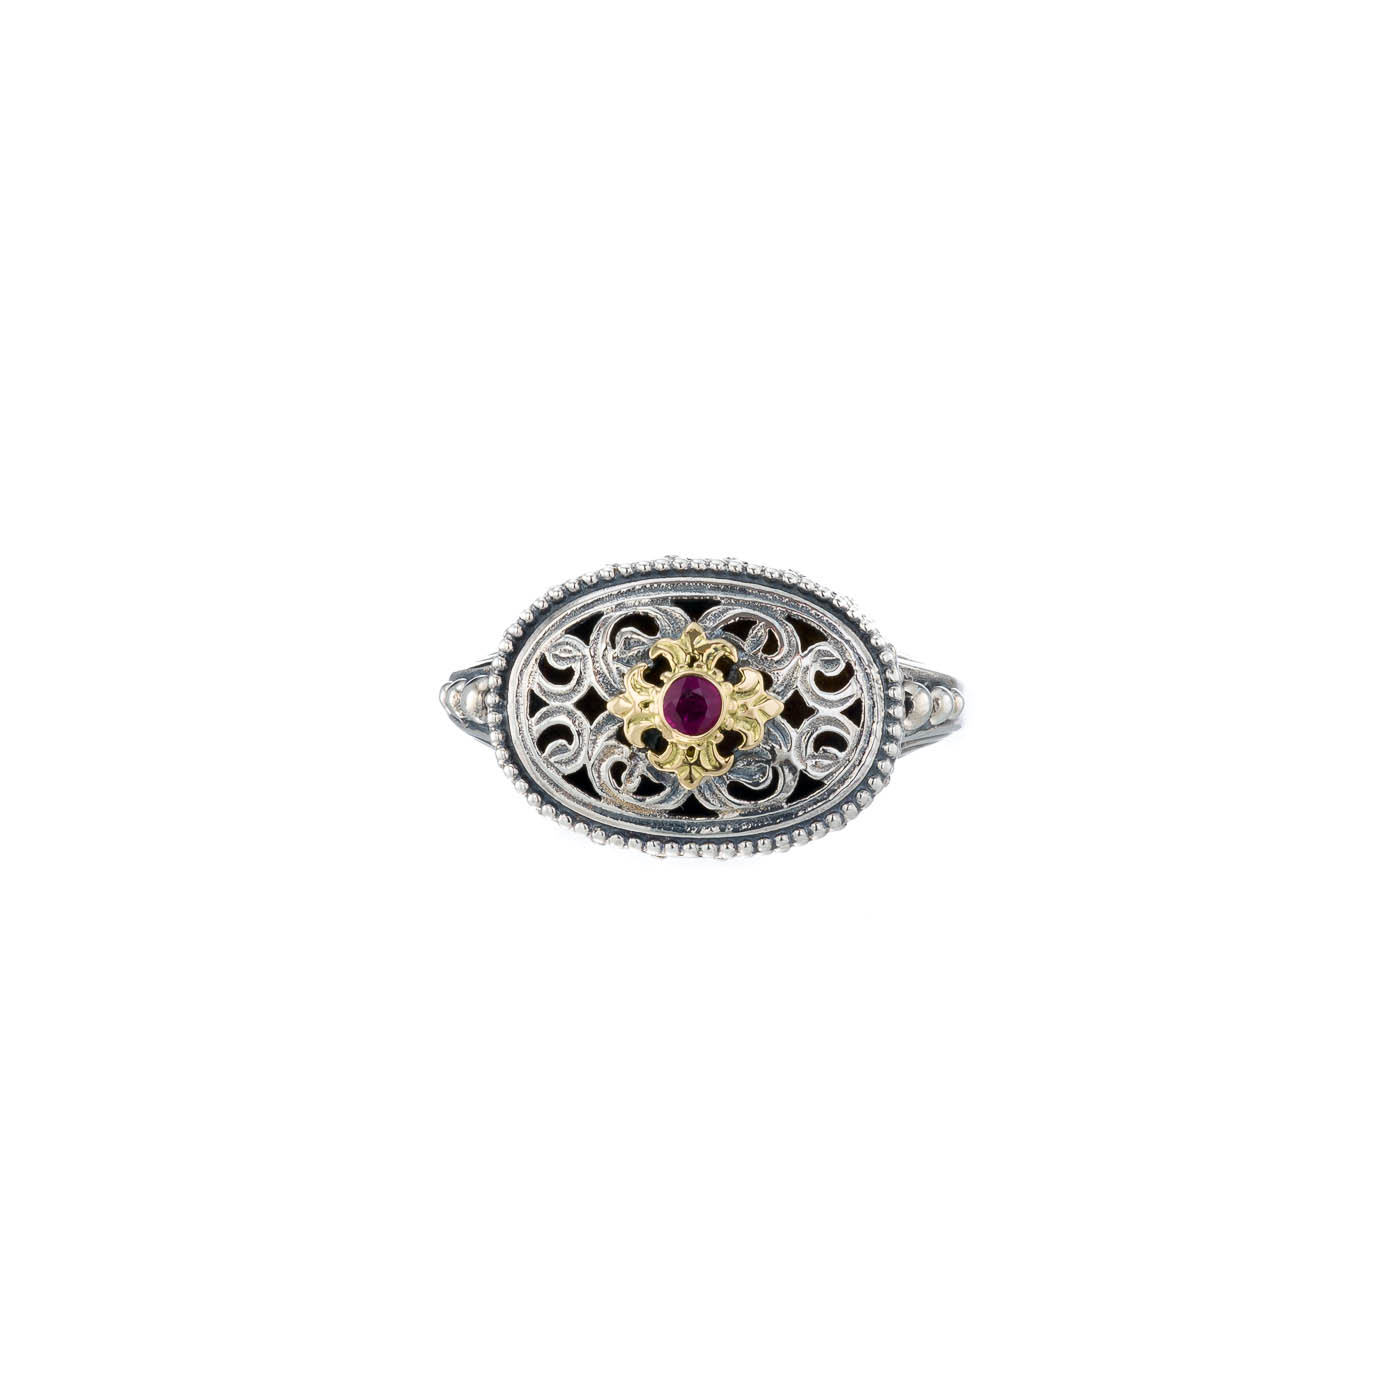 Garden shadows oval ring in 18K Gold and Sterling Silver with ruby